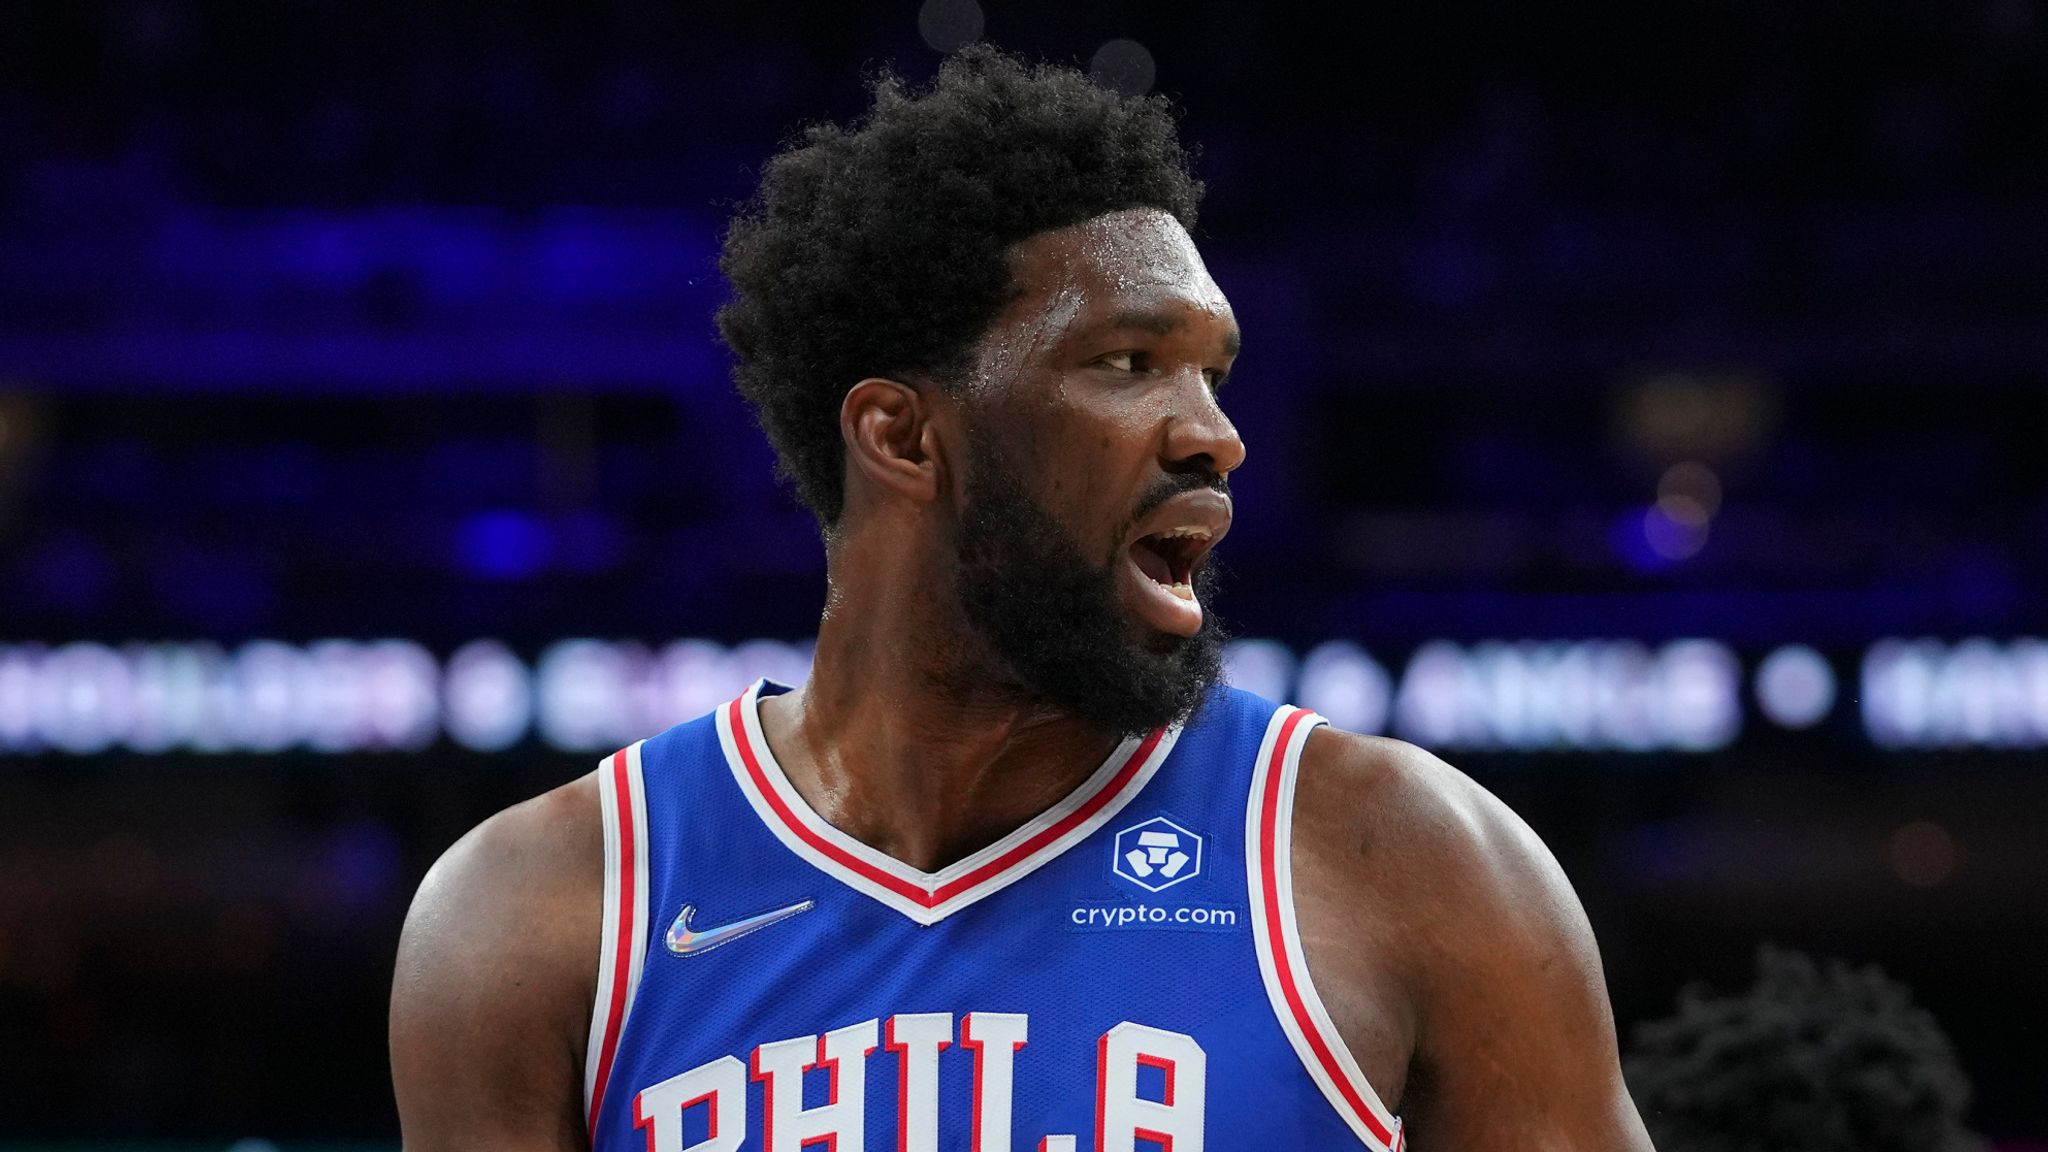 NBA Africa Game highlight: Joel Embiid gets steal, goes coast-to-coast